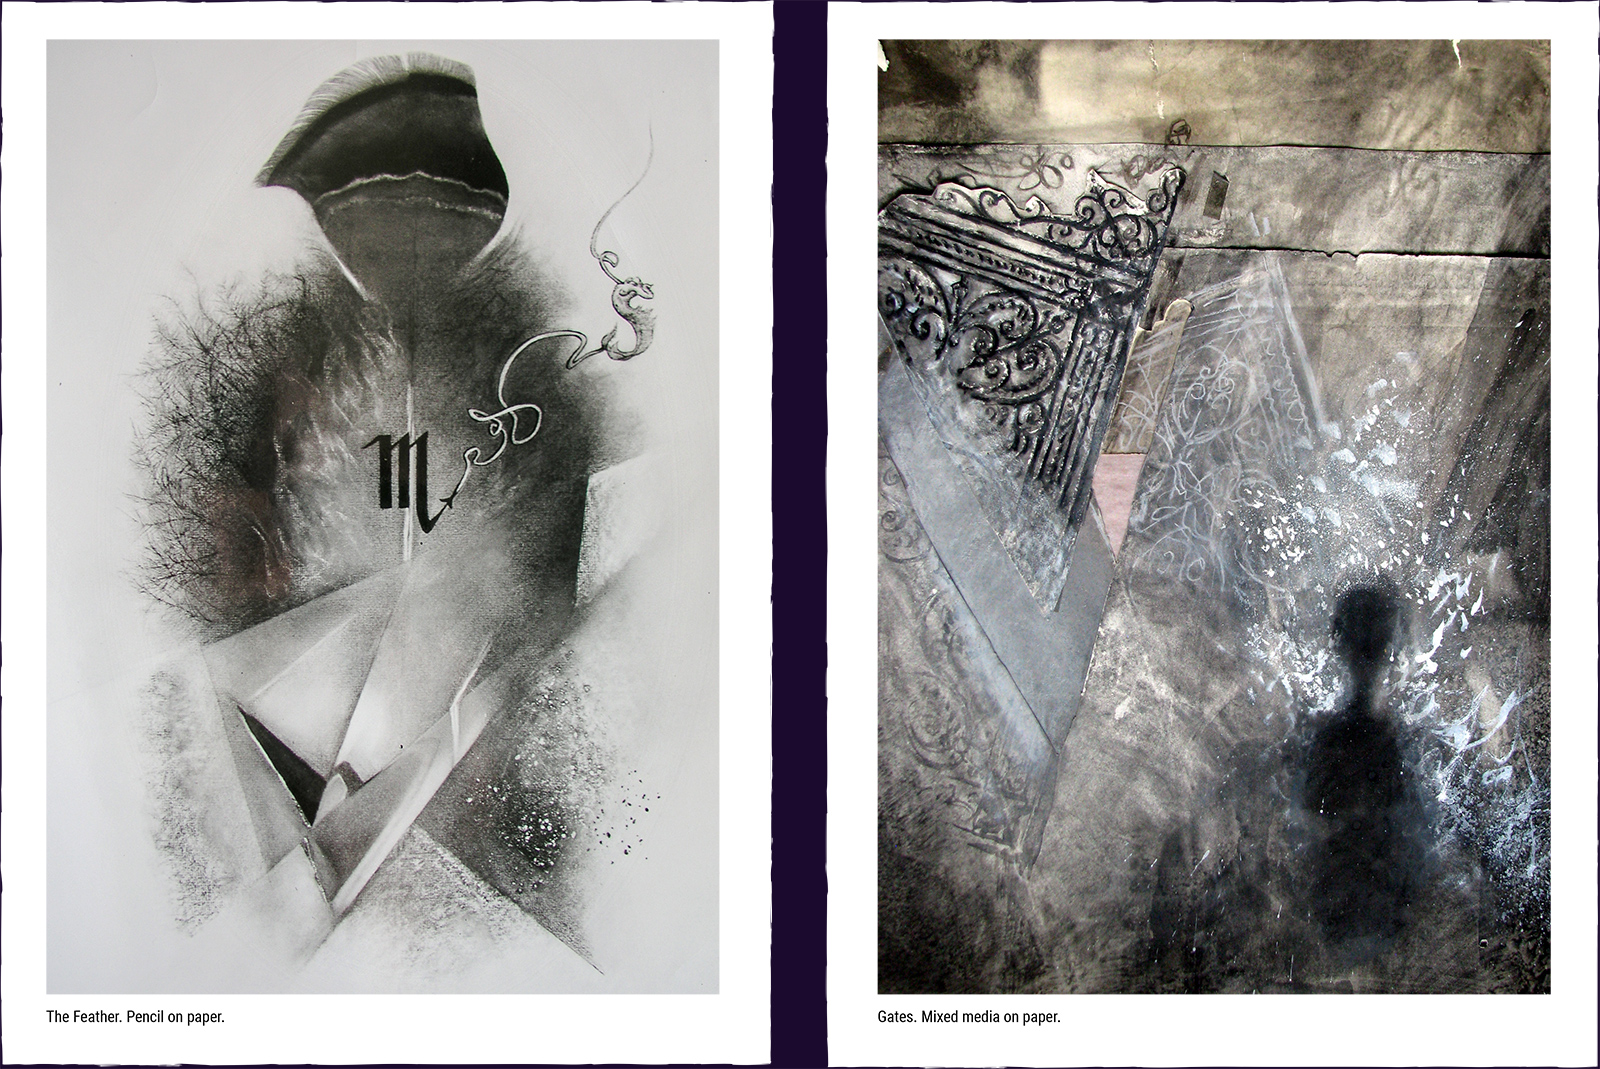 Two mystery paintings. (1) The Feather. Pencil on paper. (2) Gates. Mixed media on paper.